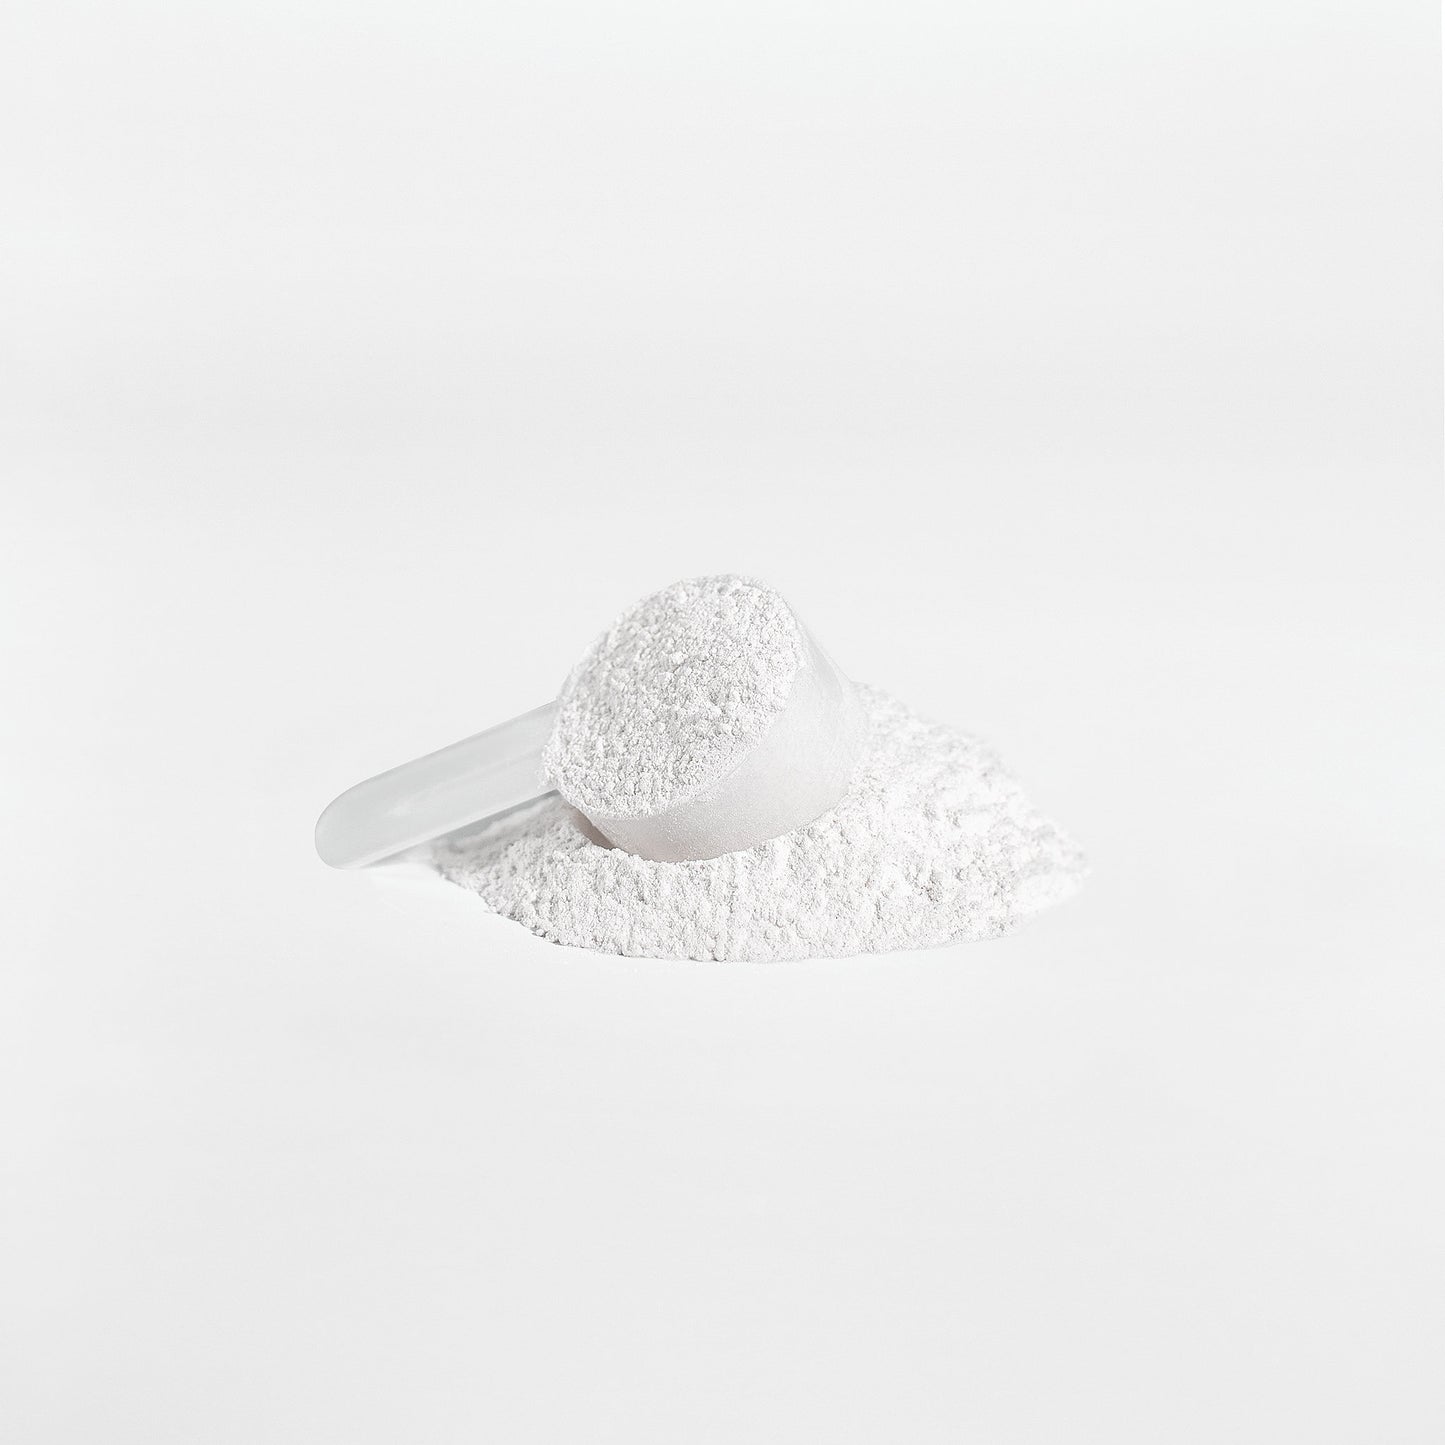 Peaked Pre-Workout Powder (Fruit Punch)